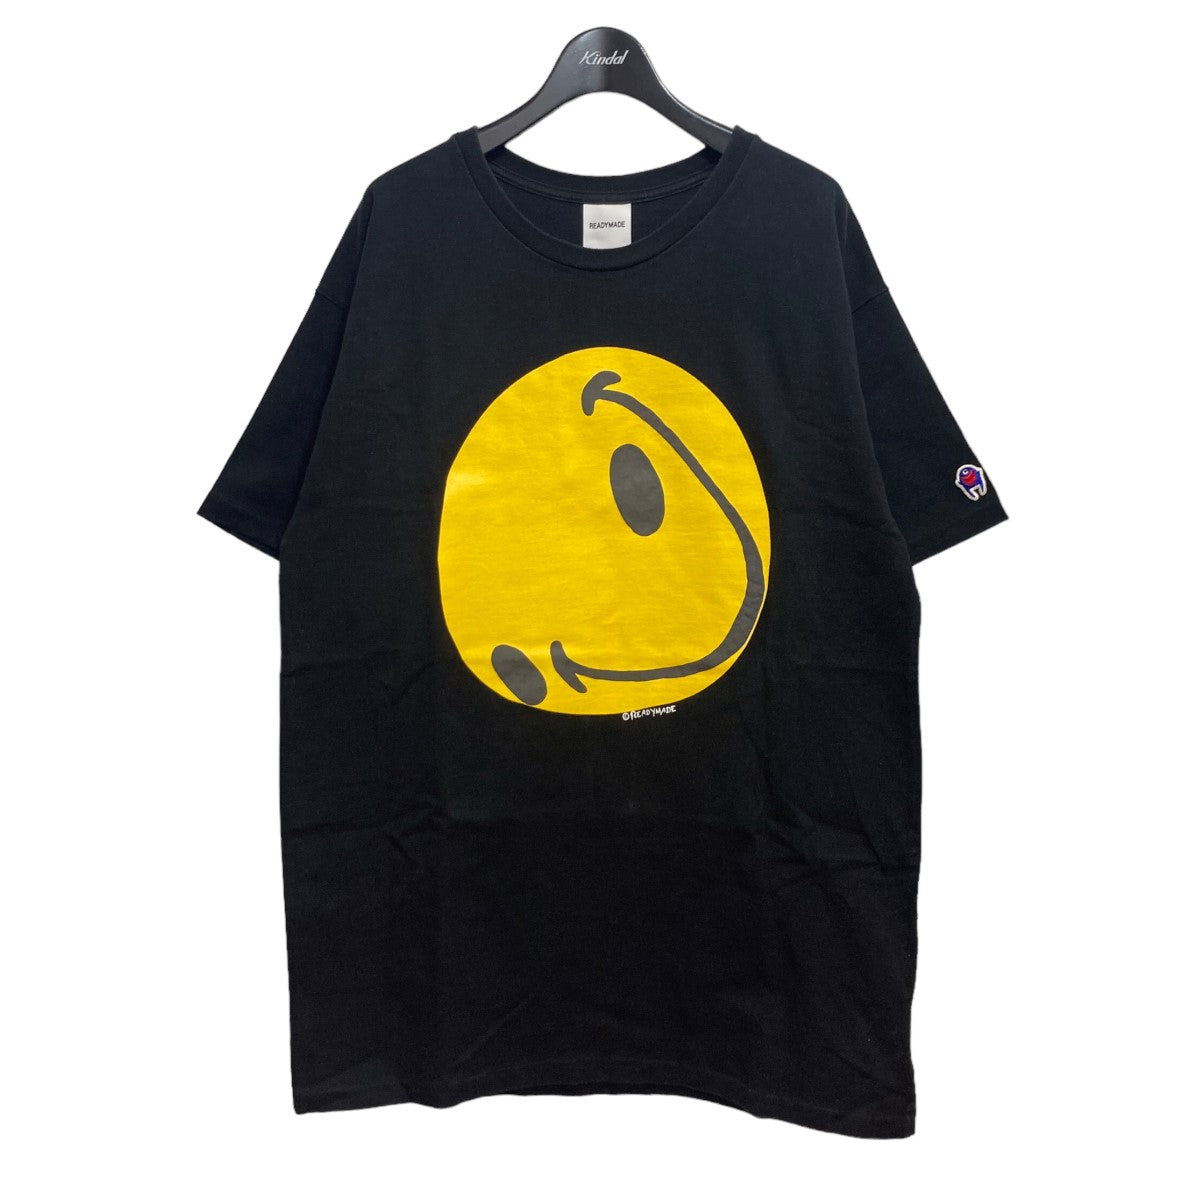 READYMADE(レディメイド) 21SS「COLLAPSED FACE T-SHIRT」Tシャツ